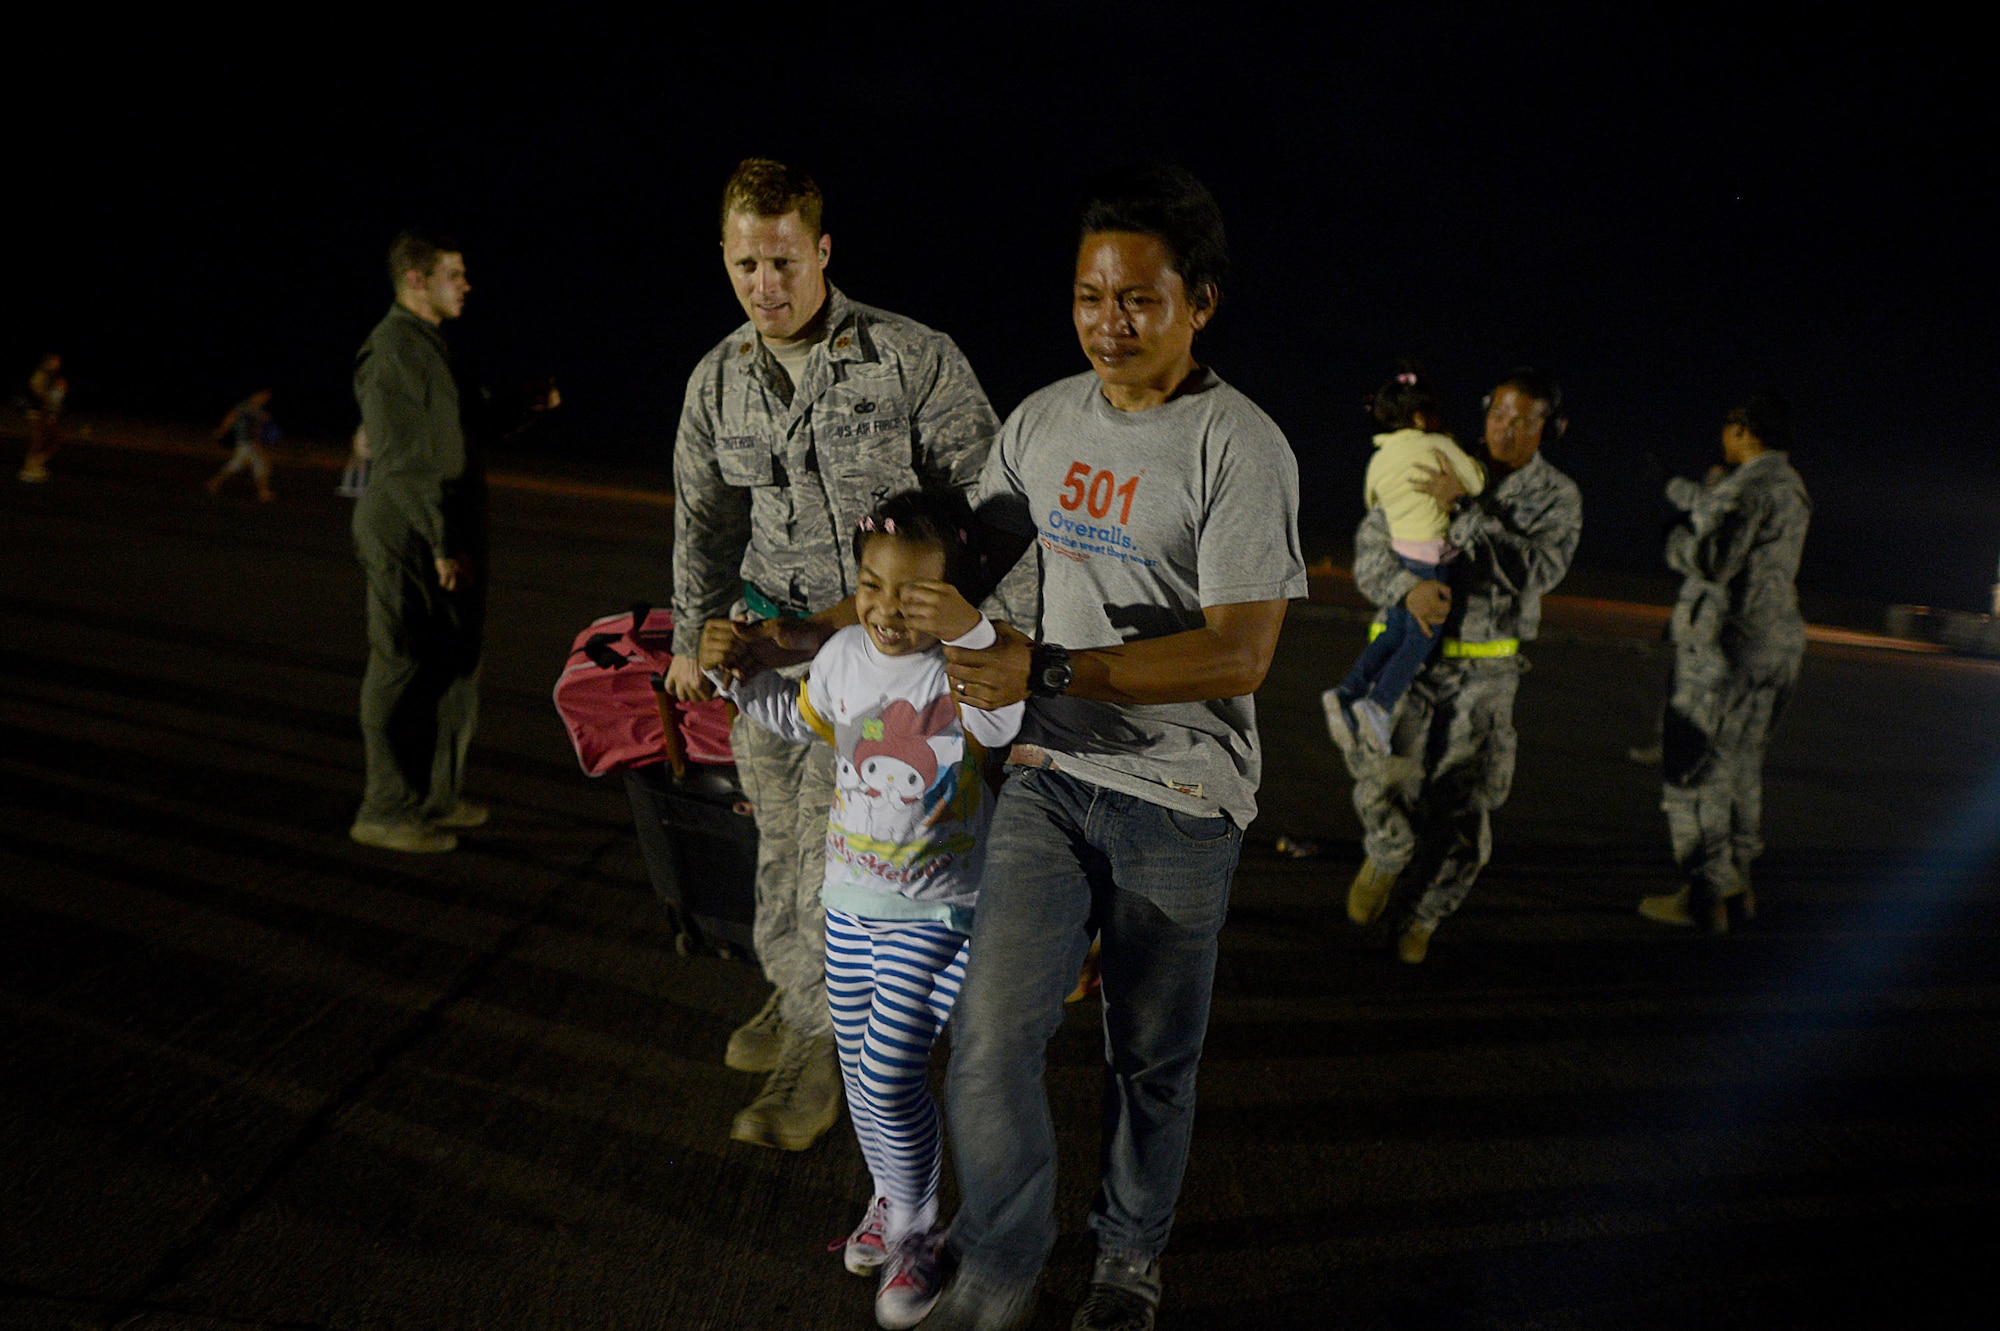 Maj. Dennis Trutwin, 736th Security Force Squadron commander, assists passengers as they board a U.S. Air Force C-130 Hercules in Tacloban, Philippines, during Operation Damayan Nov. 18, 2013. Operation Damayan is a humanitarian aid and disaster relief operation led by the Philippine government and supported by a multinational response force. (U.S. Air Force photo by 2nd Lt. Jake Bailey/Released)